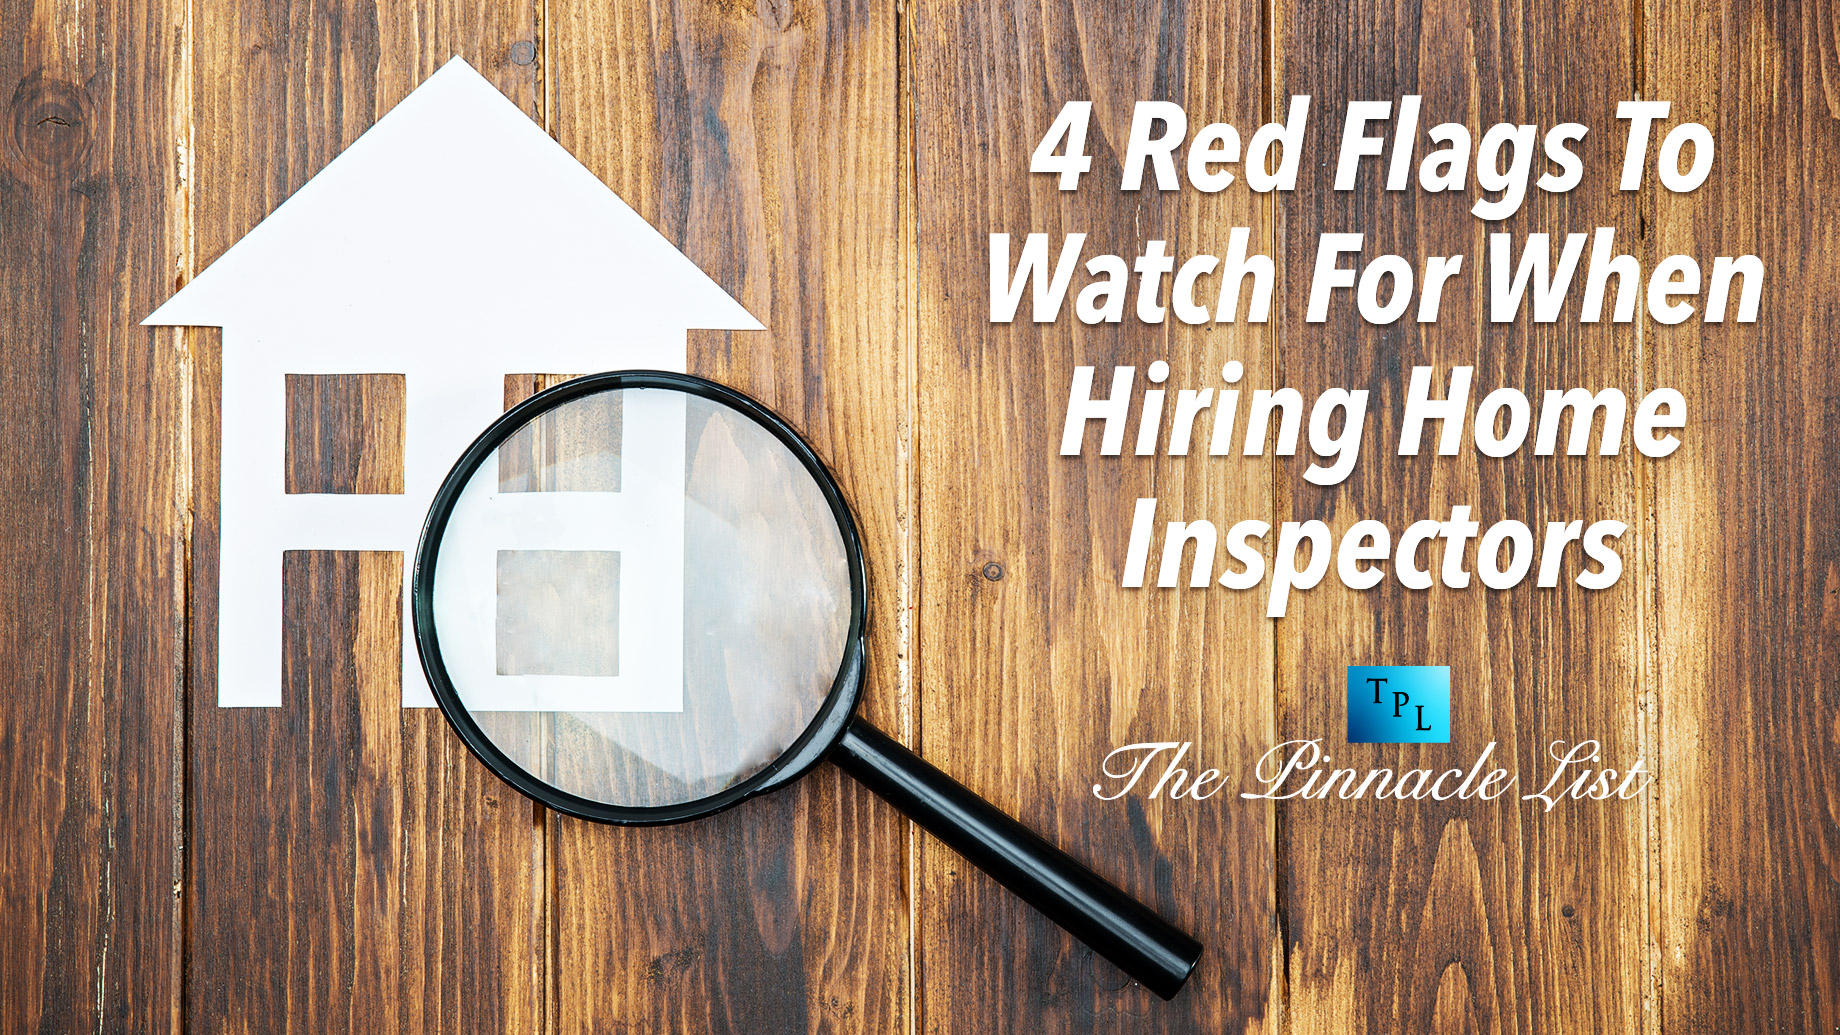 4 Red Flags To Watch For When Hiring Home Inspectors